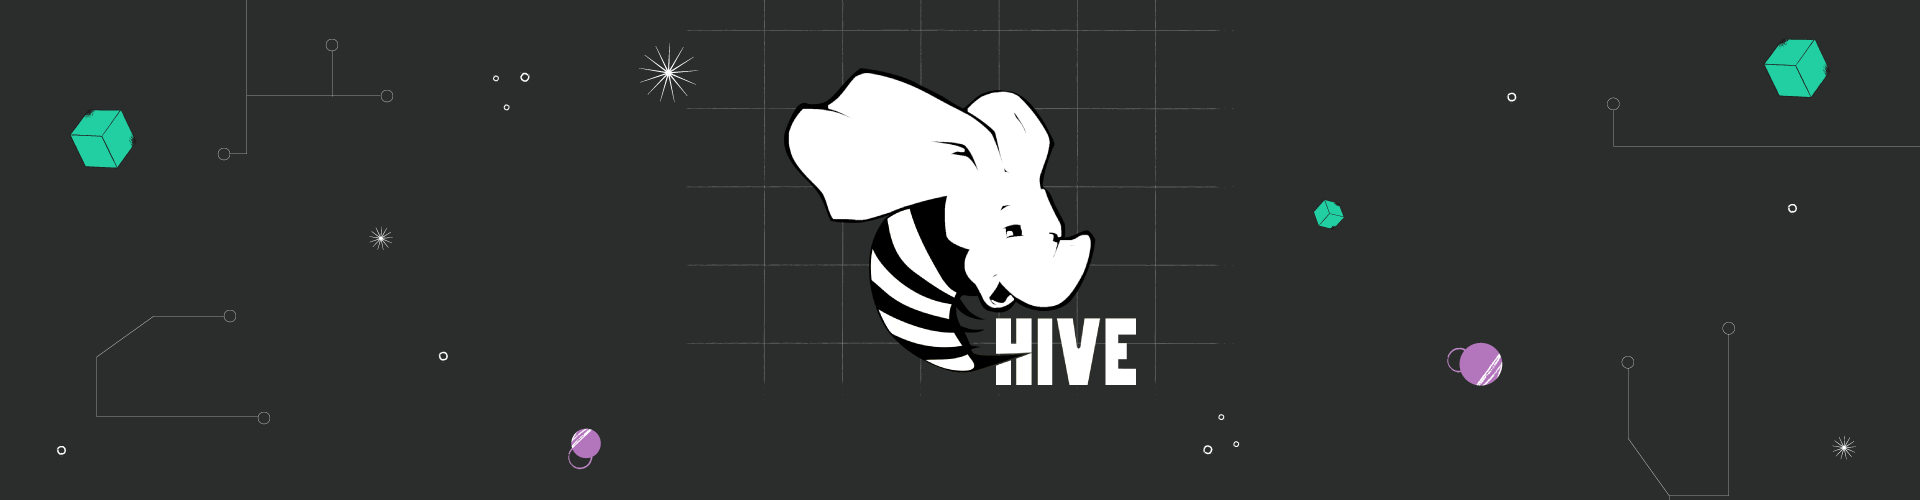 A Deep Dive into Apache Hive Architecture: From Data Storage to Data Analysis with SQL-like Hive Query Language